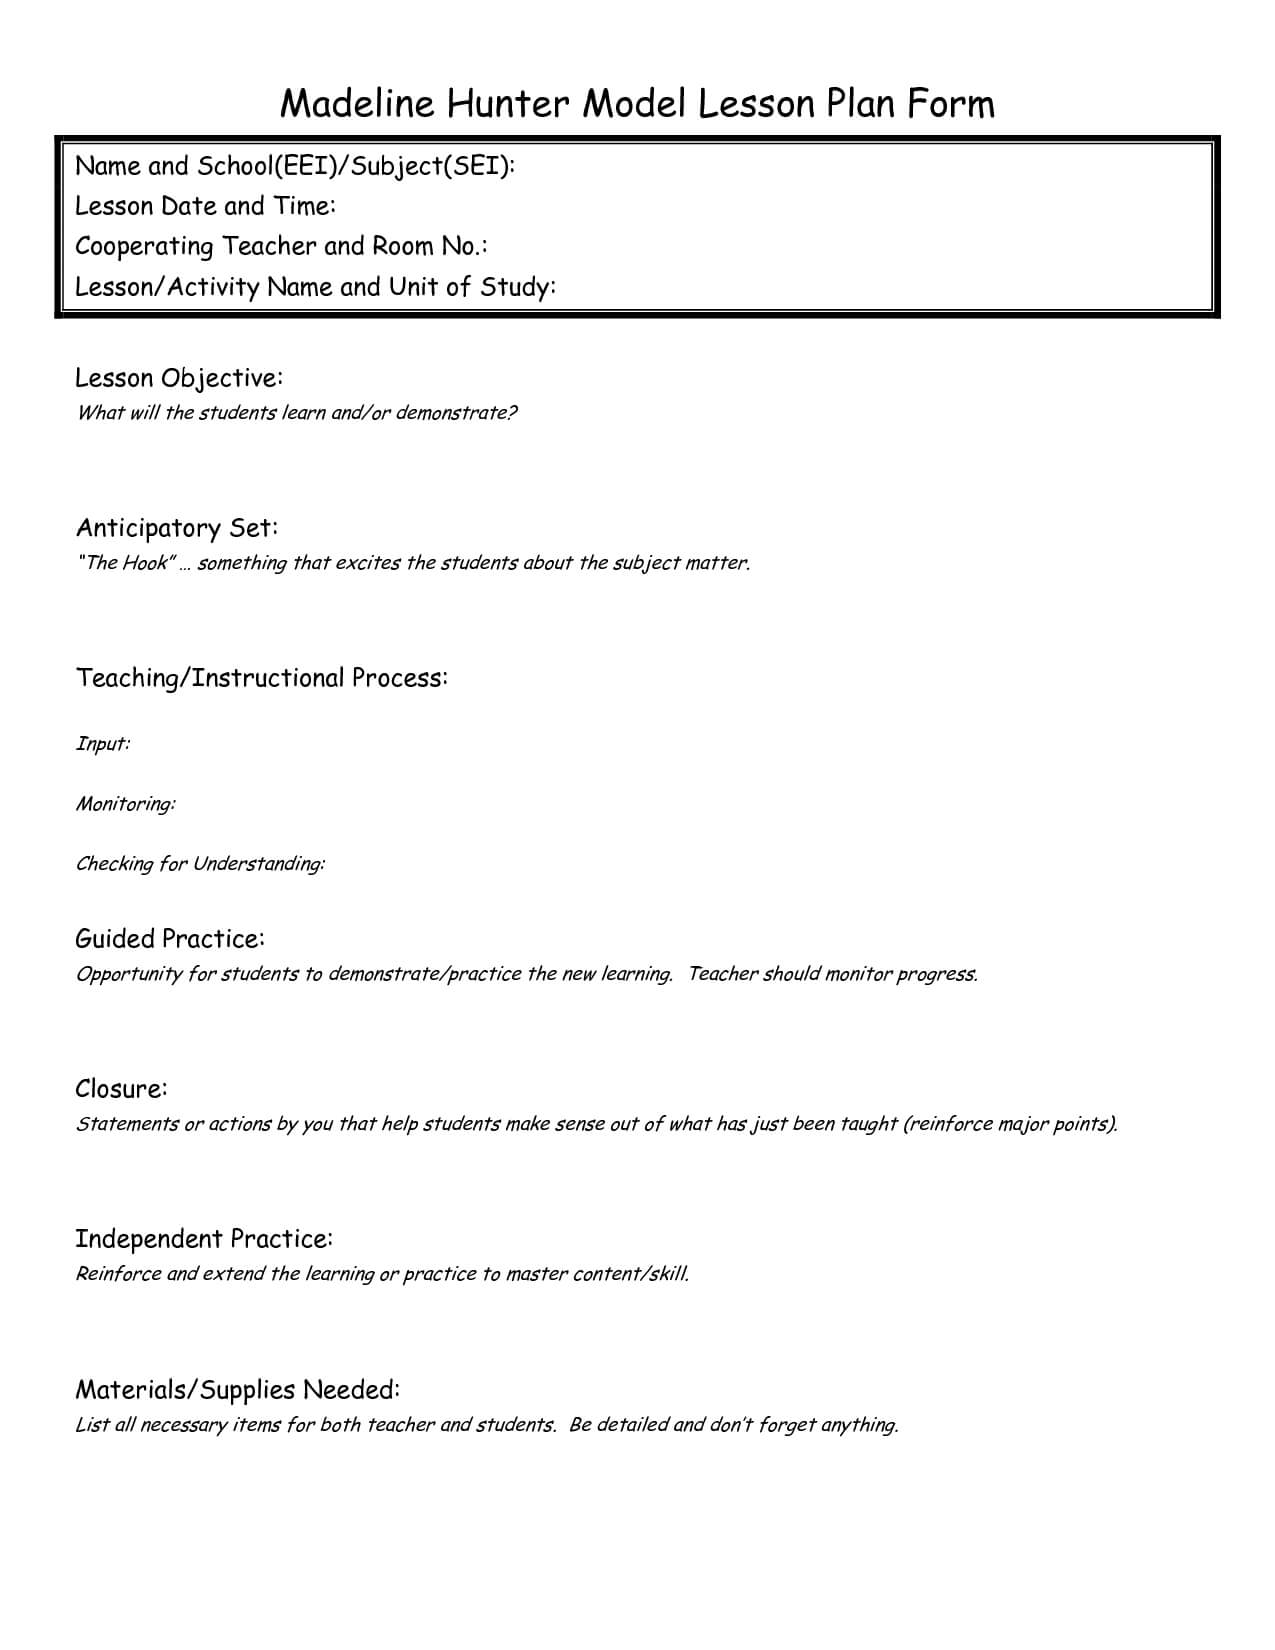 Madeline Hunter Lesson Plan Format Template – Google Search For Madeline Hunter Lesson Plan Blank Template